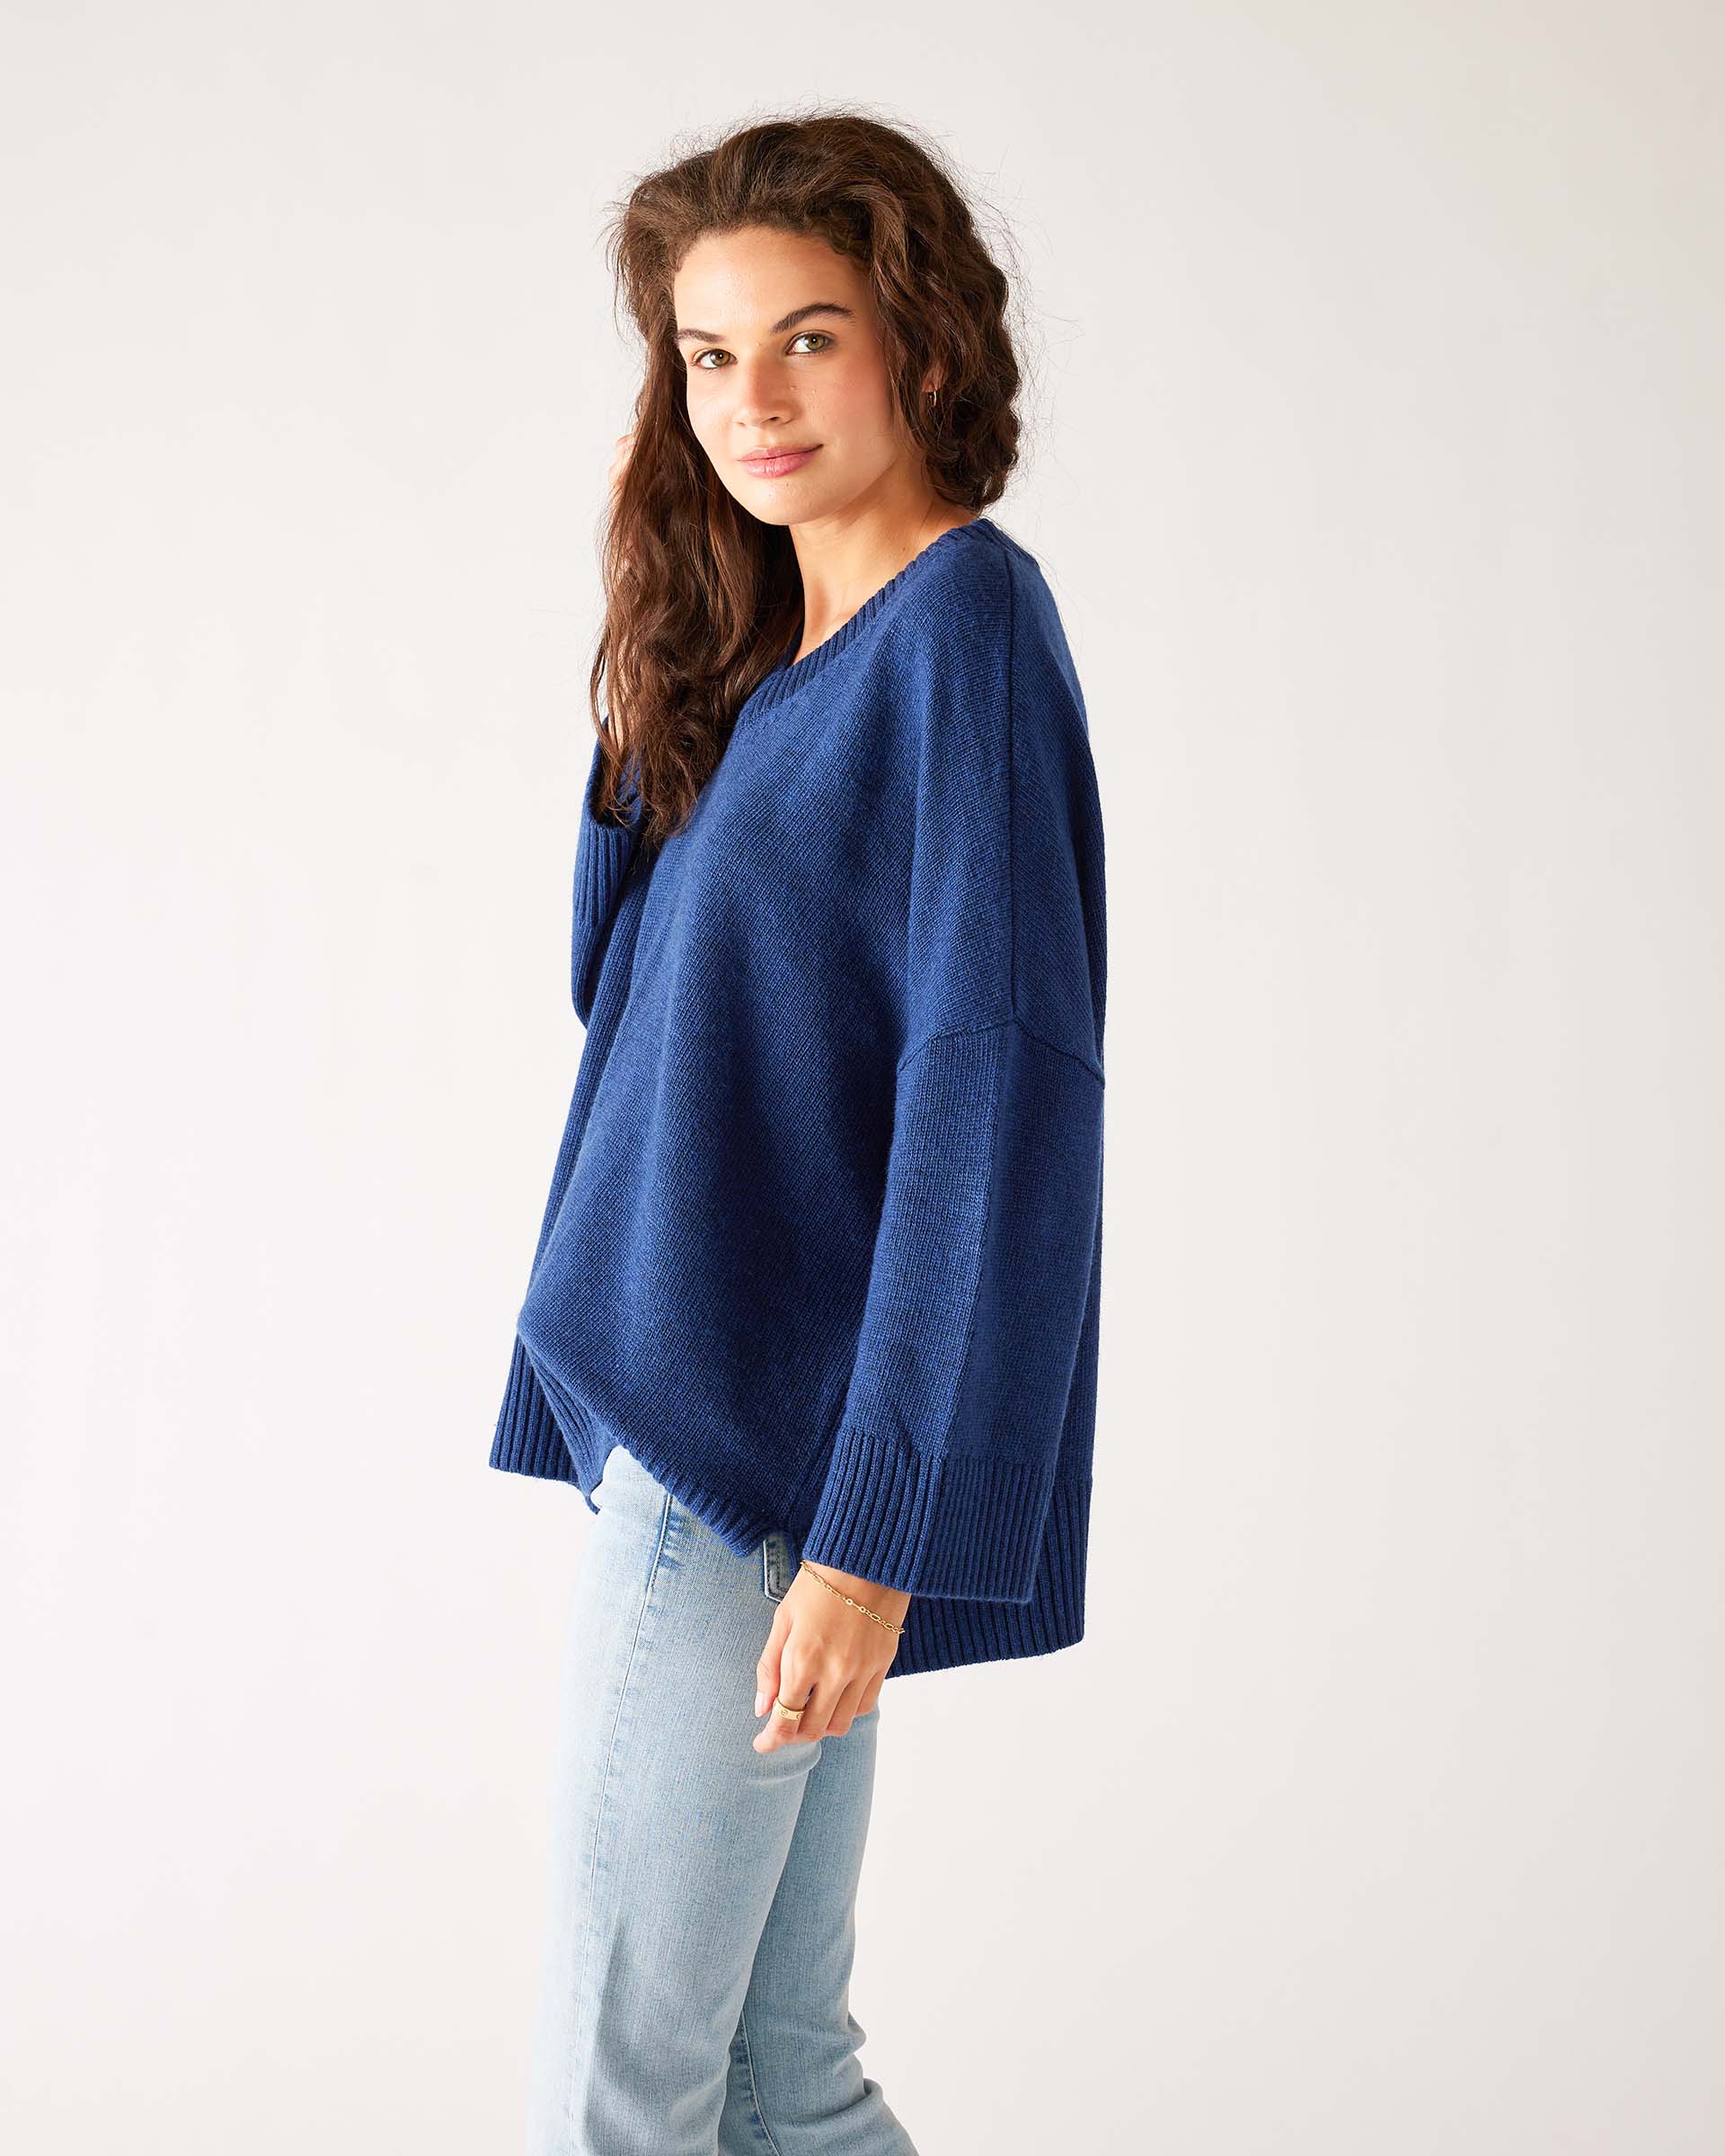 Women's Dark Blue Midweight Loose Fitting V-neck Sweater Side View